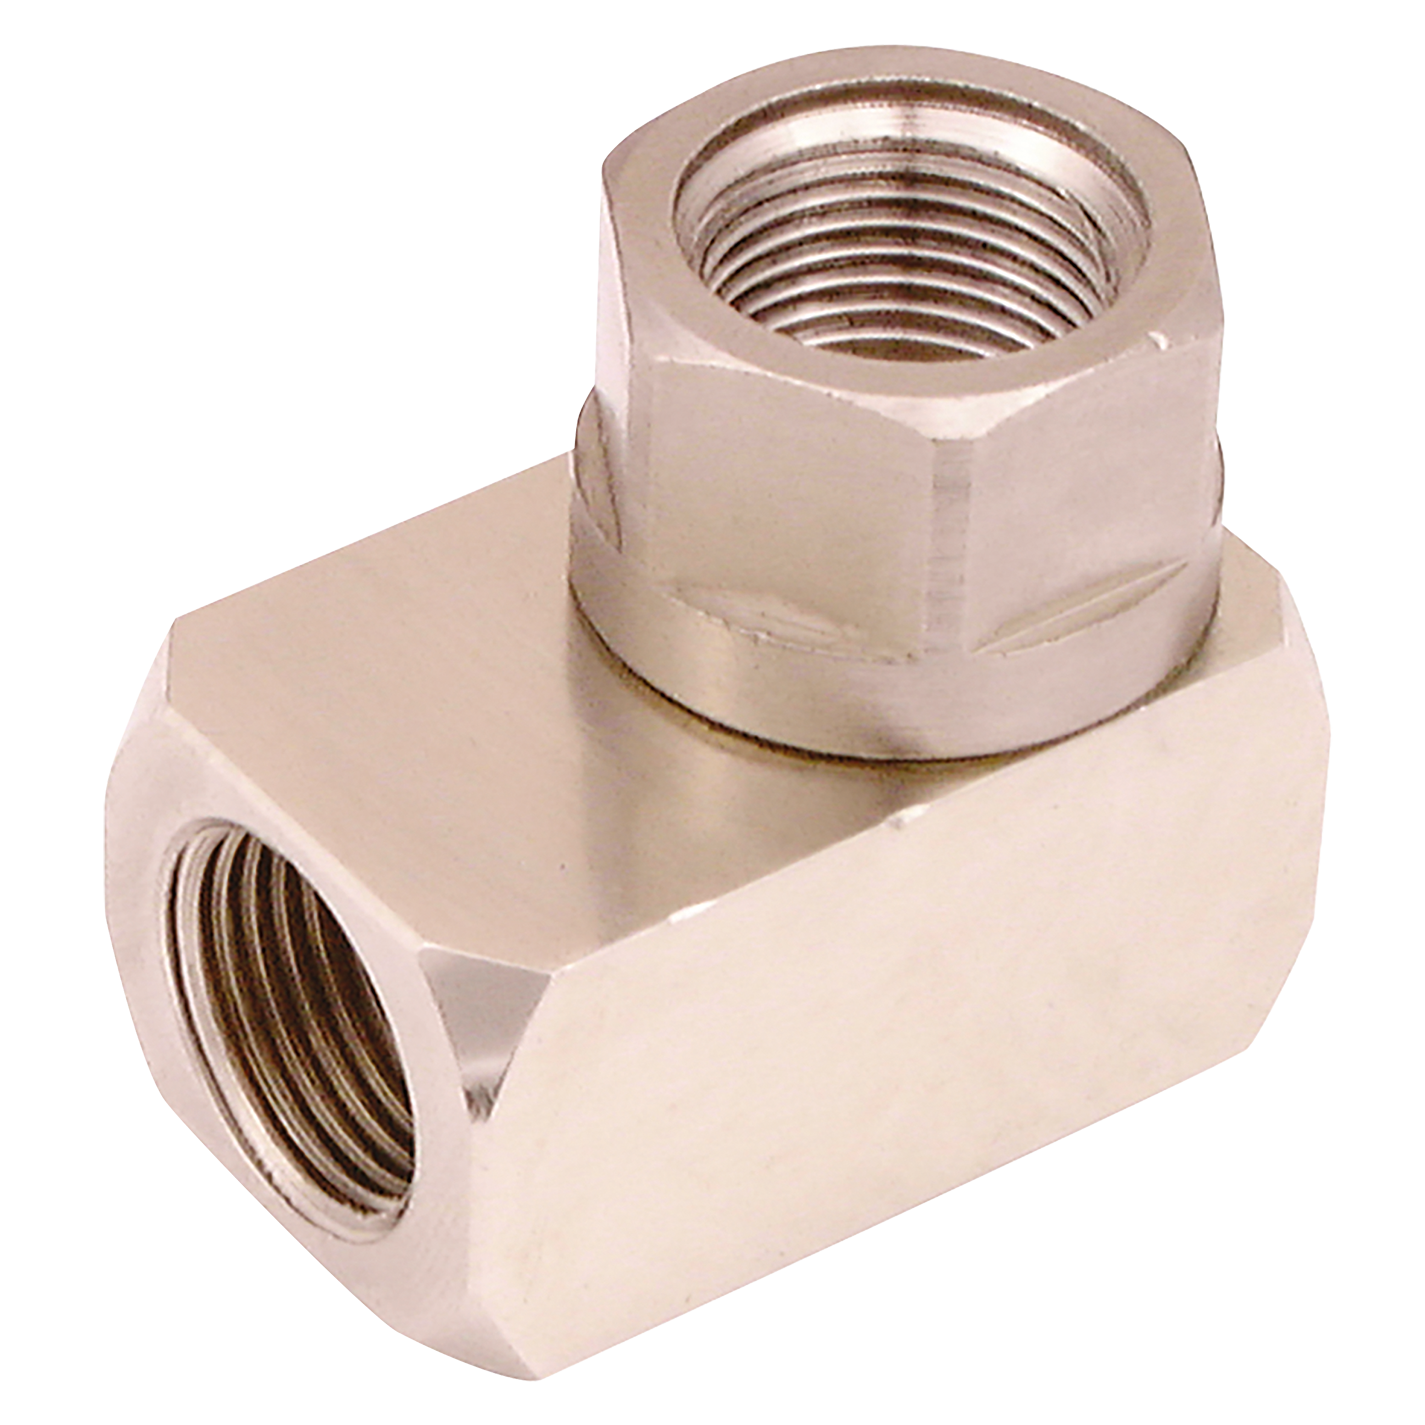 1 x 1/8" BSP Male Inlet x 1 x 1/8" BSP Female Outlets  Rotating Joint